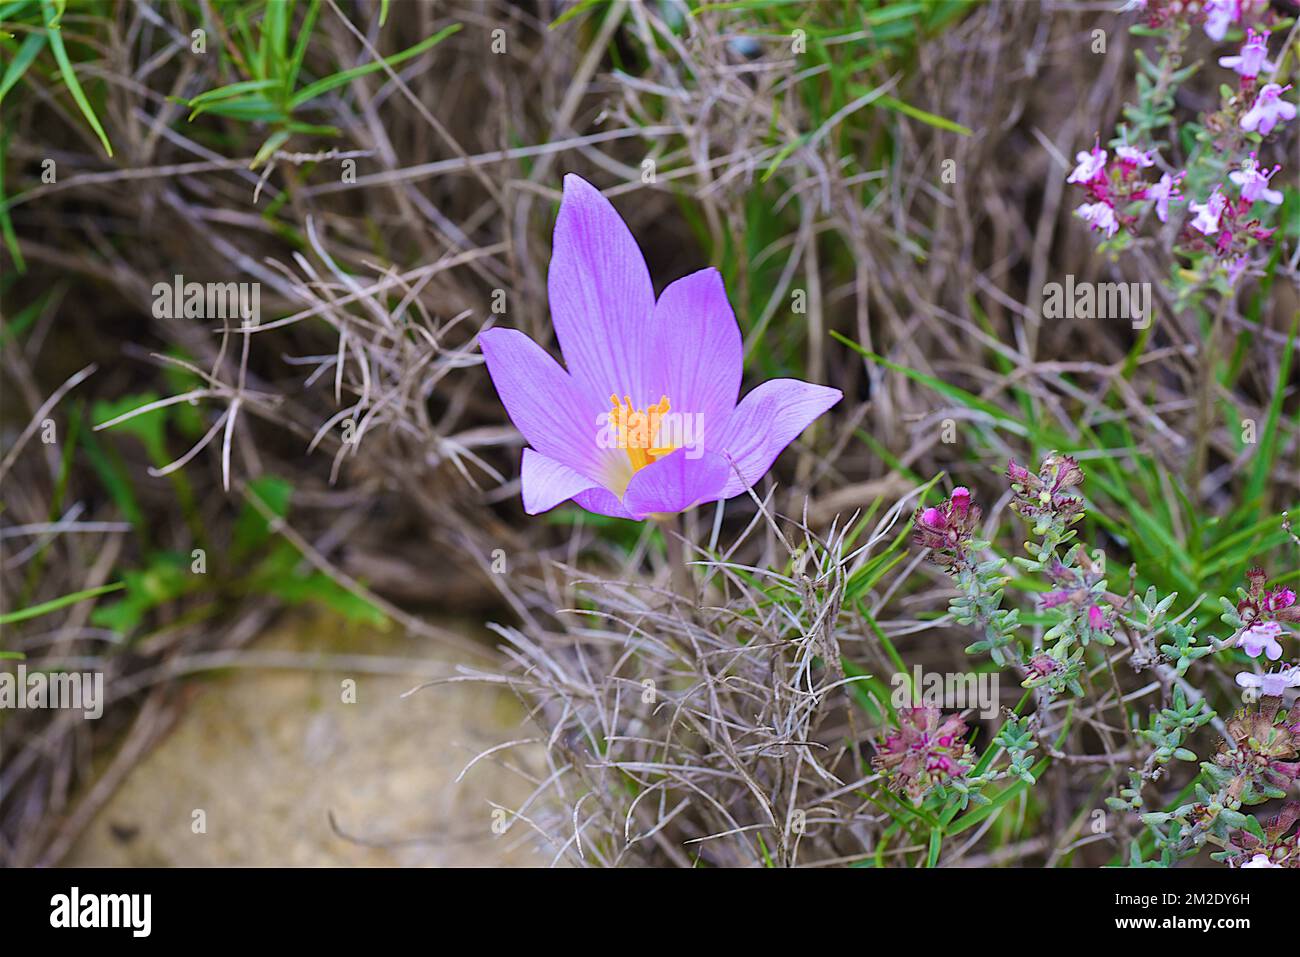 Nature and flowers | Nature et fleurs sauvages 09/10/2017 Stock Photo